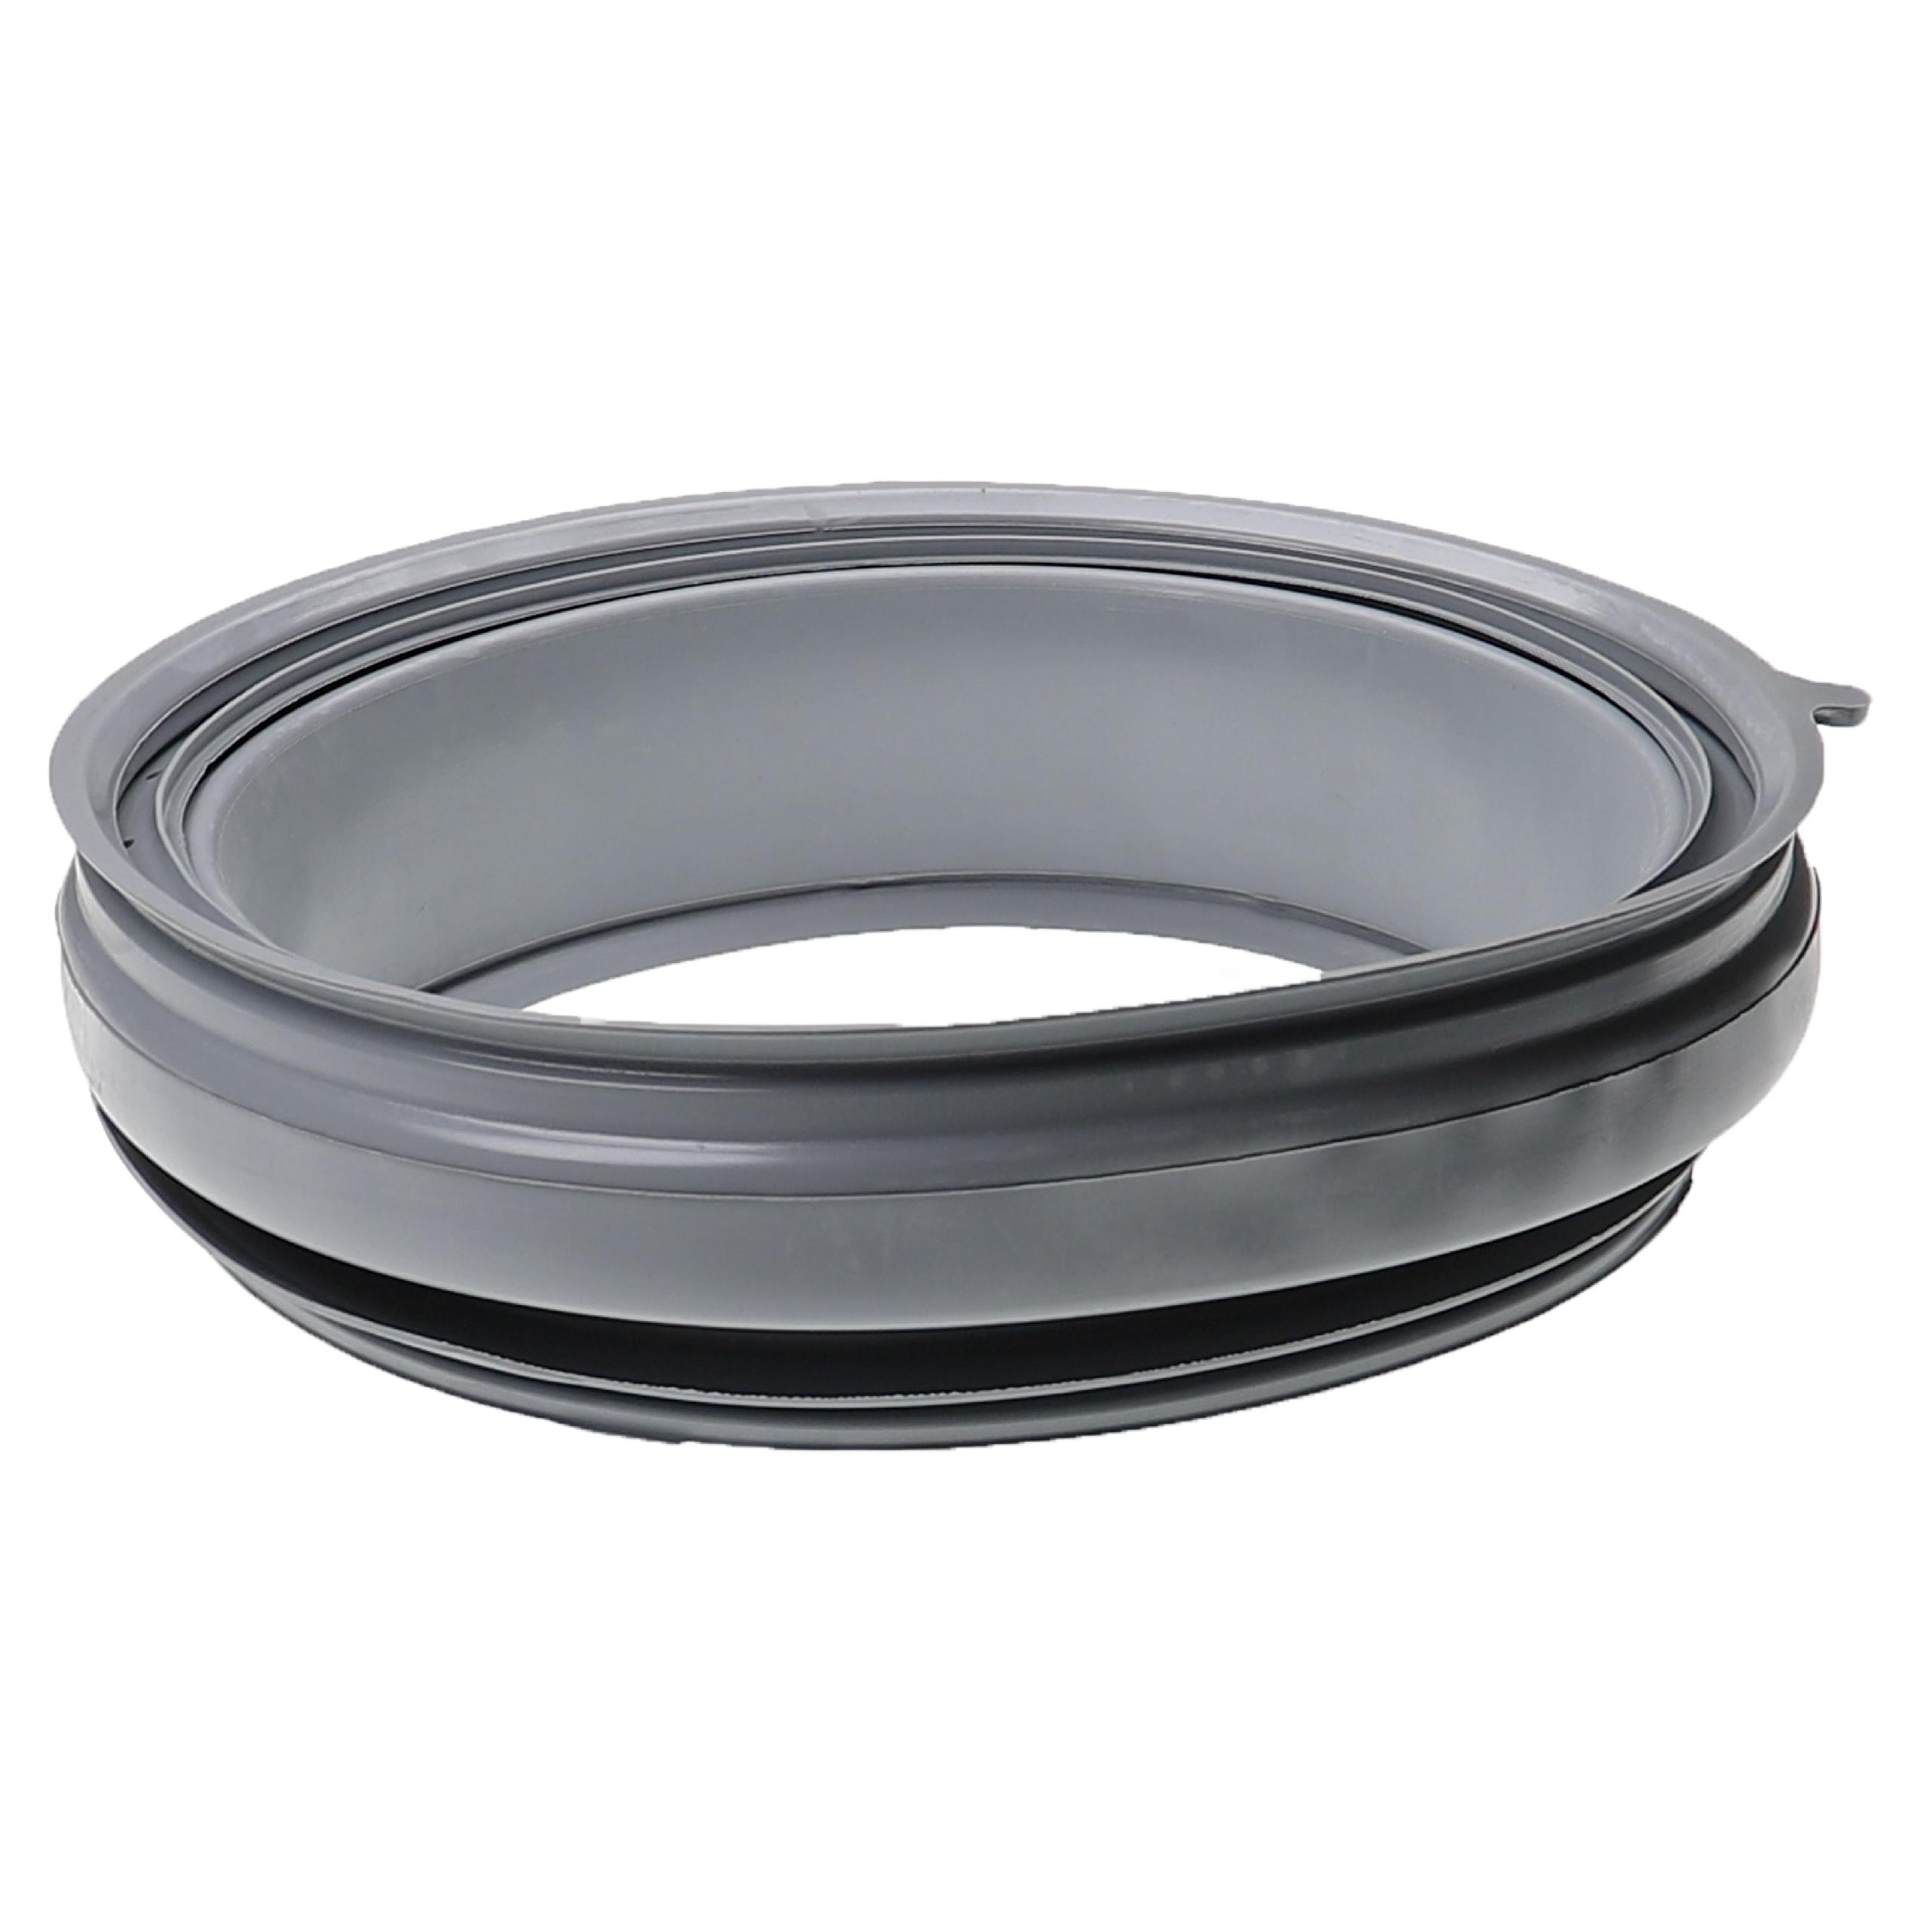 Door Seal replaces 1436571 for Miele Washing Machine